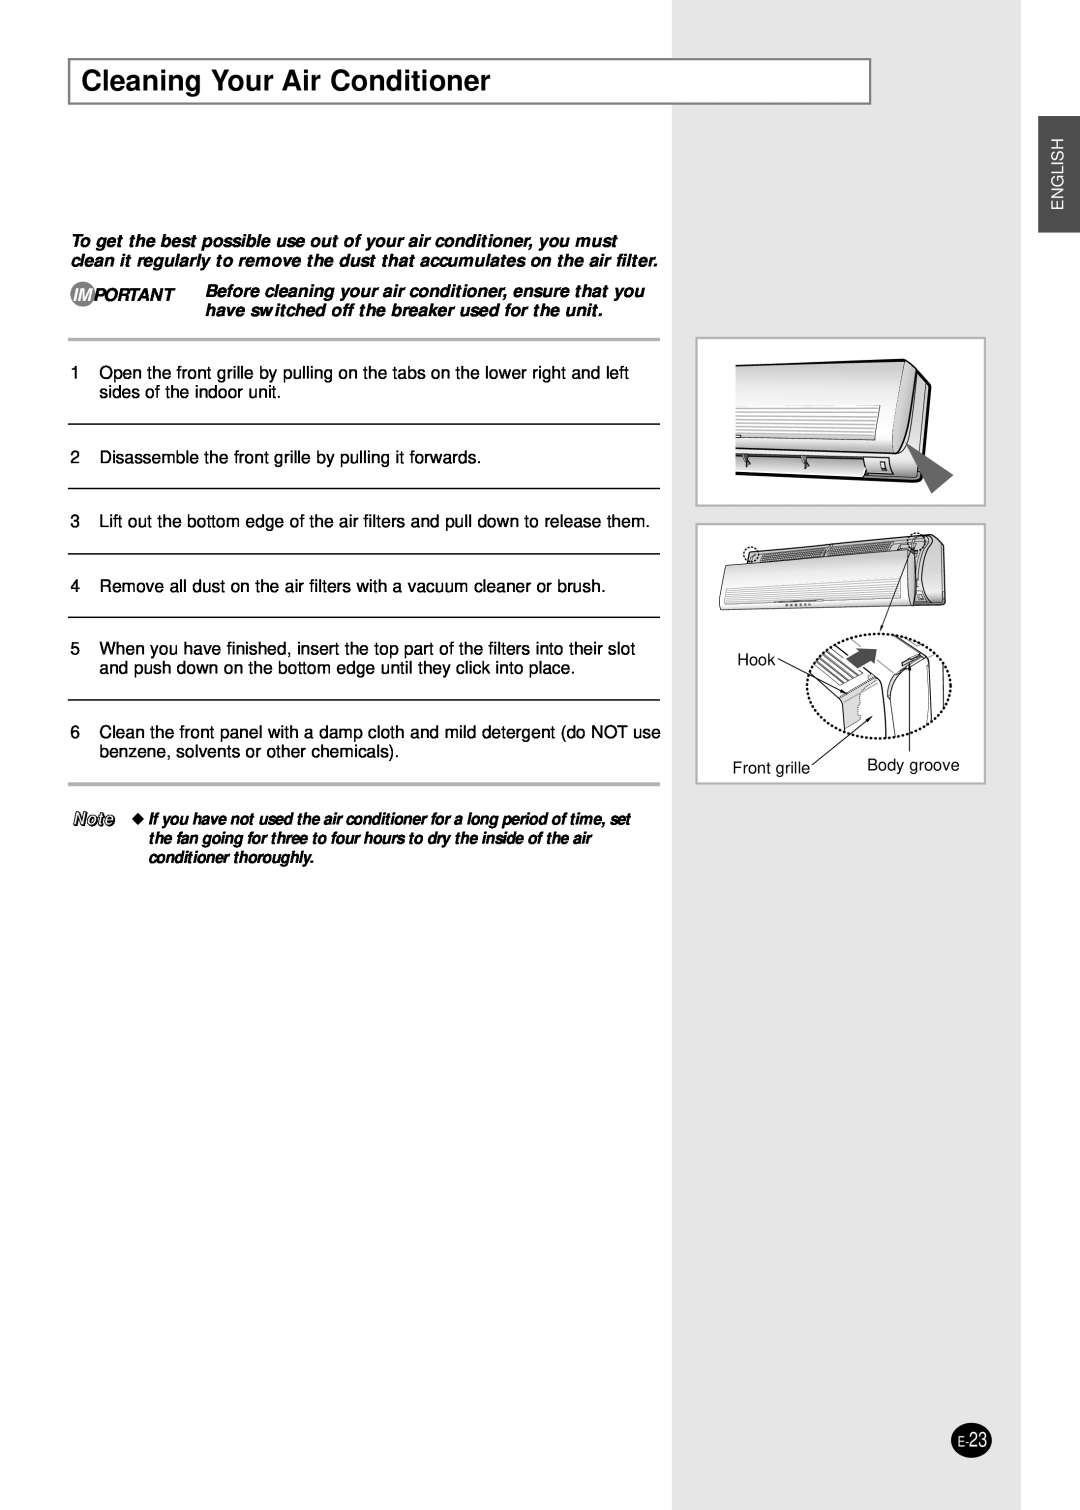 Samsung UQ30C1(2)BCD, AQ30C1(2)BCD installation manual Cleaning Your Air Conditioner, English 